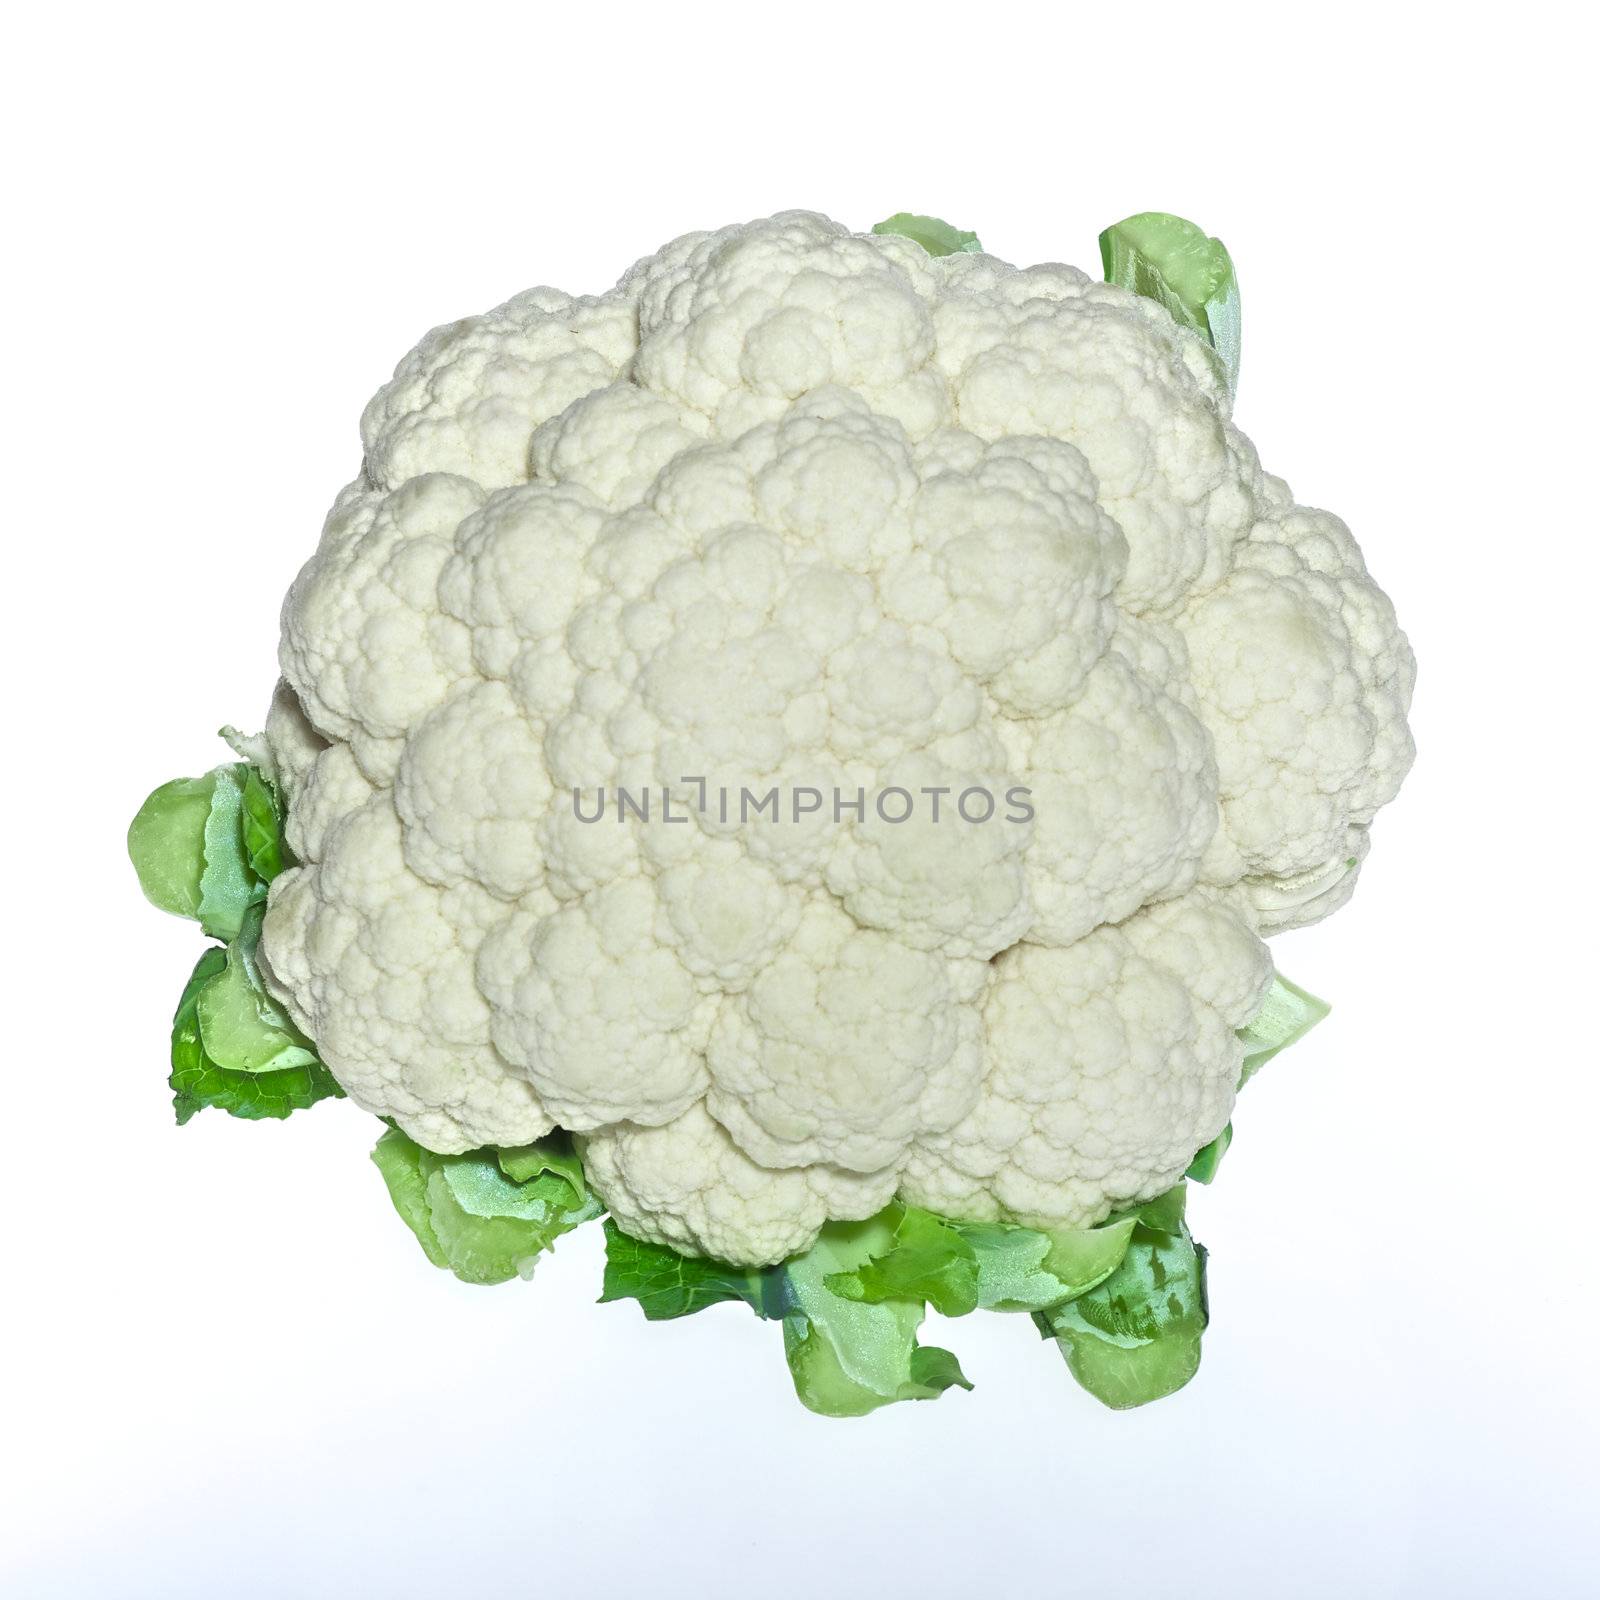 Trimmed Cauliflower isolated on white